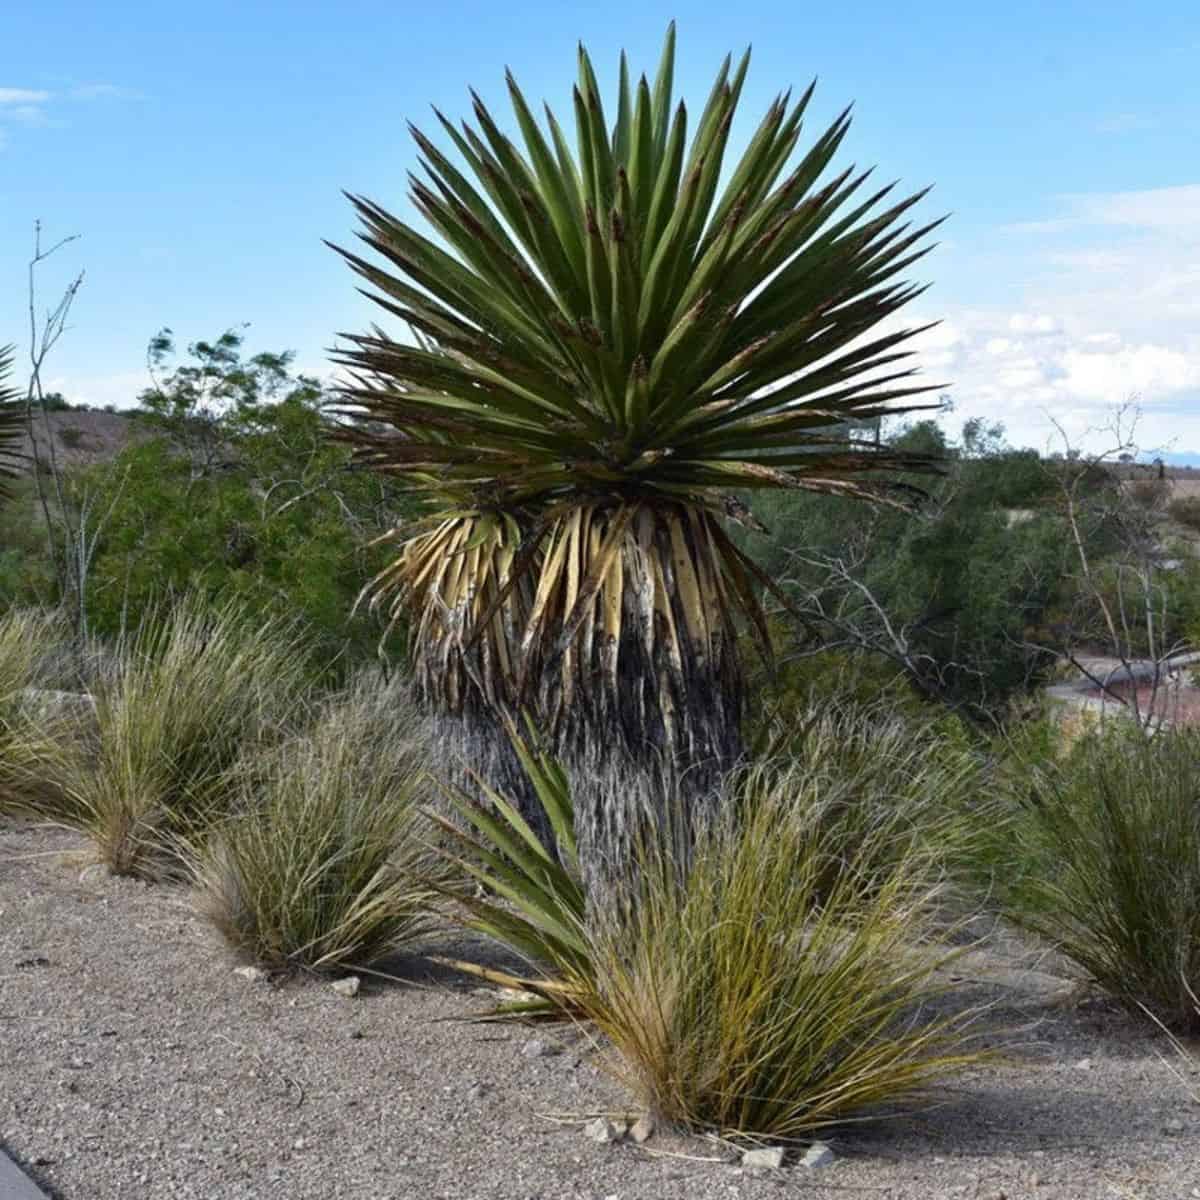 Yucca faxoniana grows outdoor.